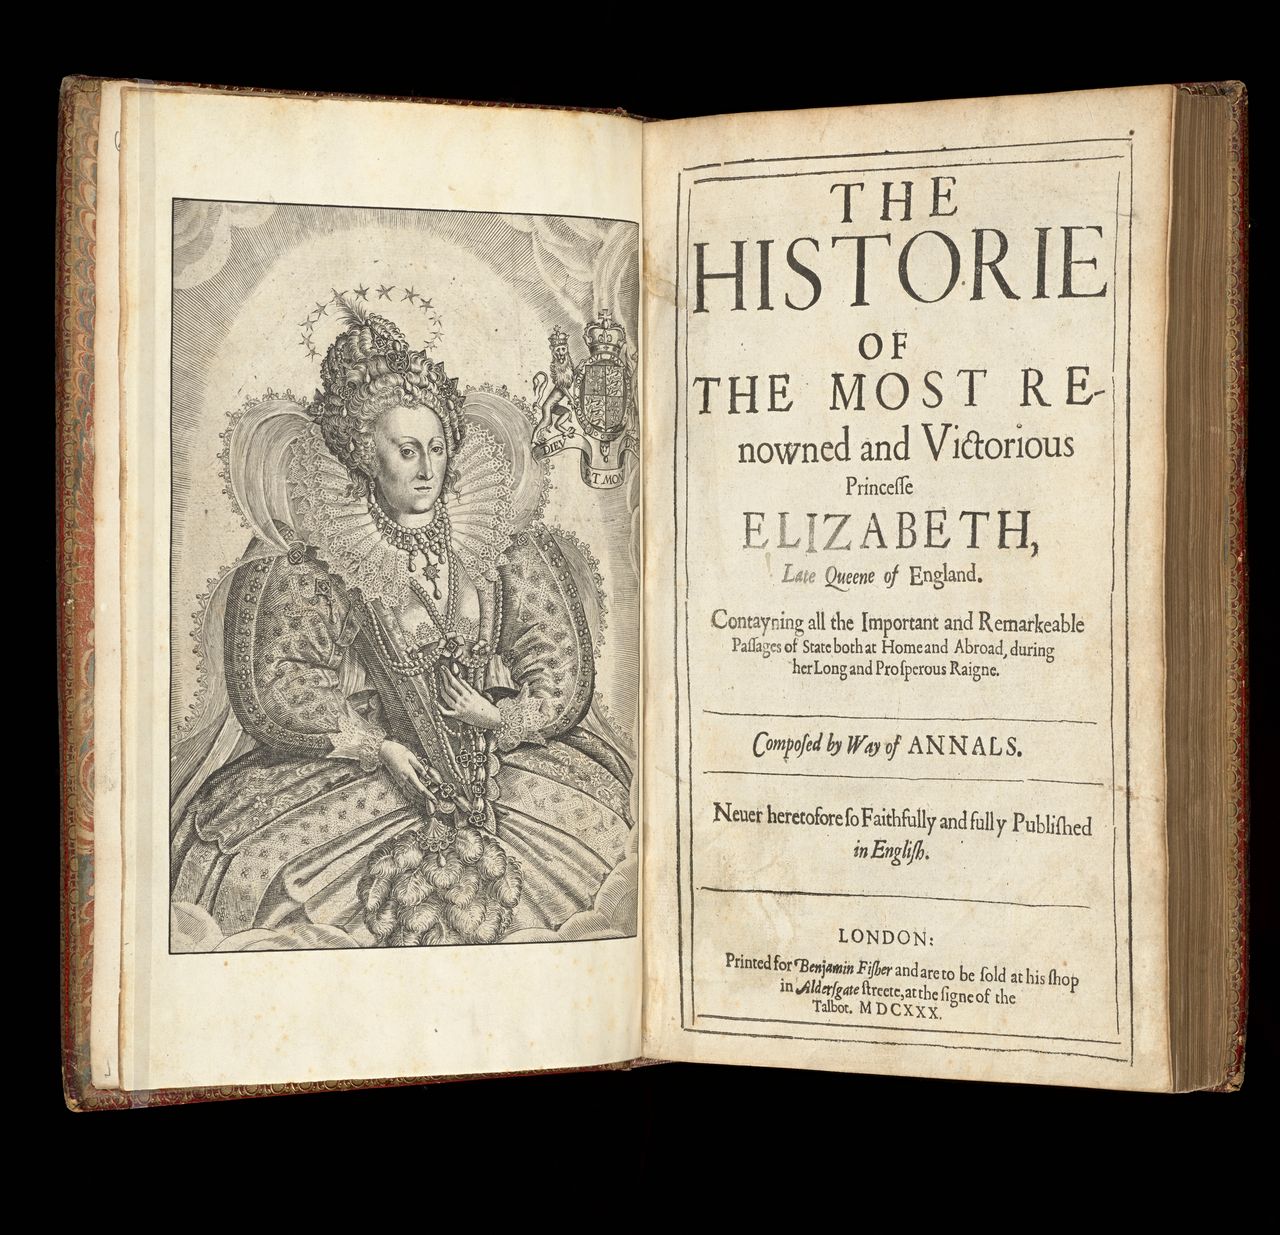 William Camden, <em>The historie of the most renowned and victorious princesse Elizabeth, late Queene of England...</em> London, printed by Nicholas Okes... for Benjamin Fisher and are to be sold at his shop in Aldersgate streete, at the signe of the Talbot, 1630, State Library Victoria, Melbourne (RAREEMM 126/6)
